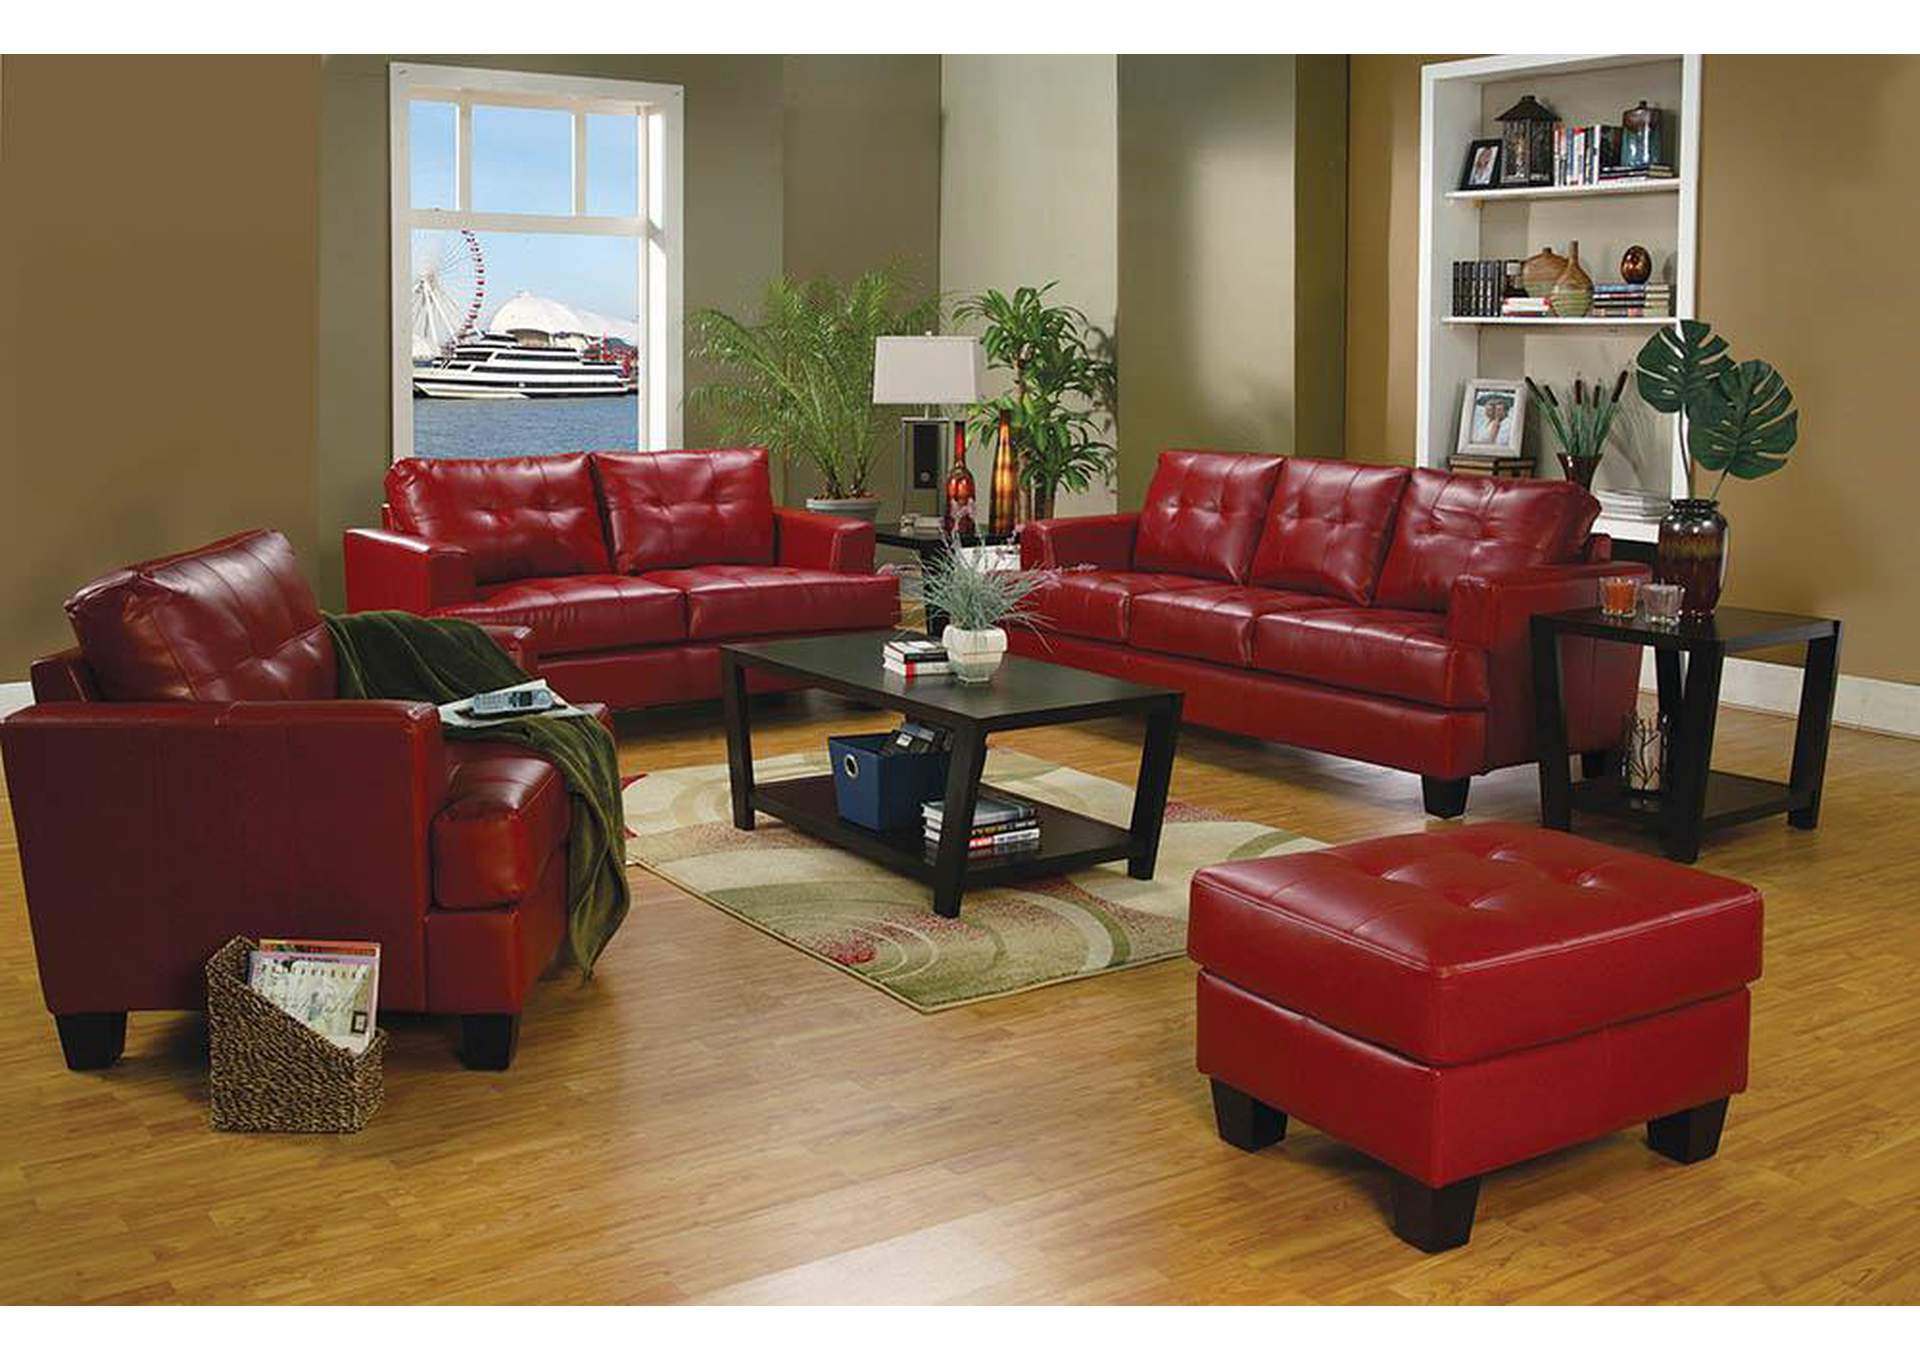 Samuel Red Bonded Leather Love Seat,ABF Coaster Furniture